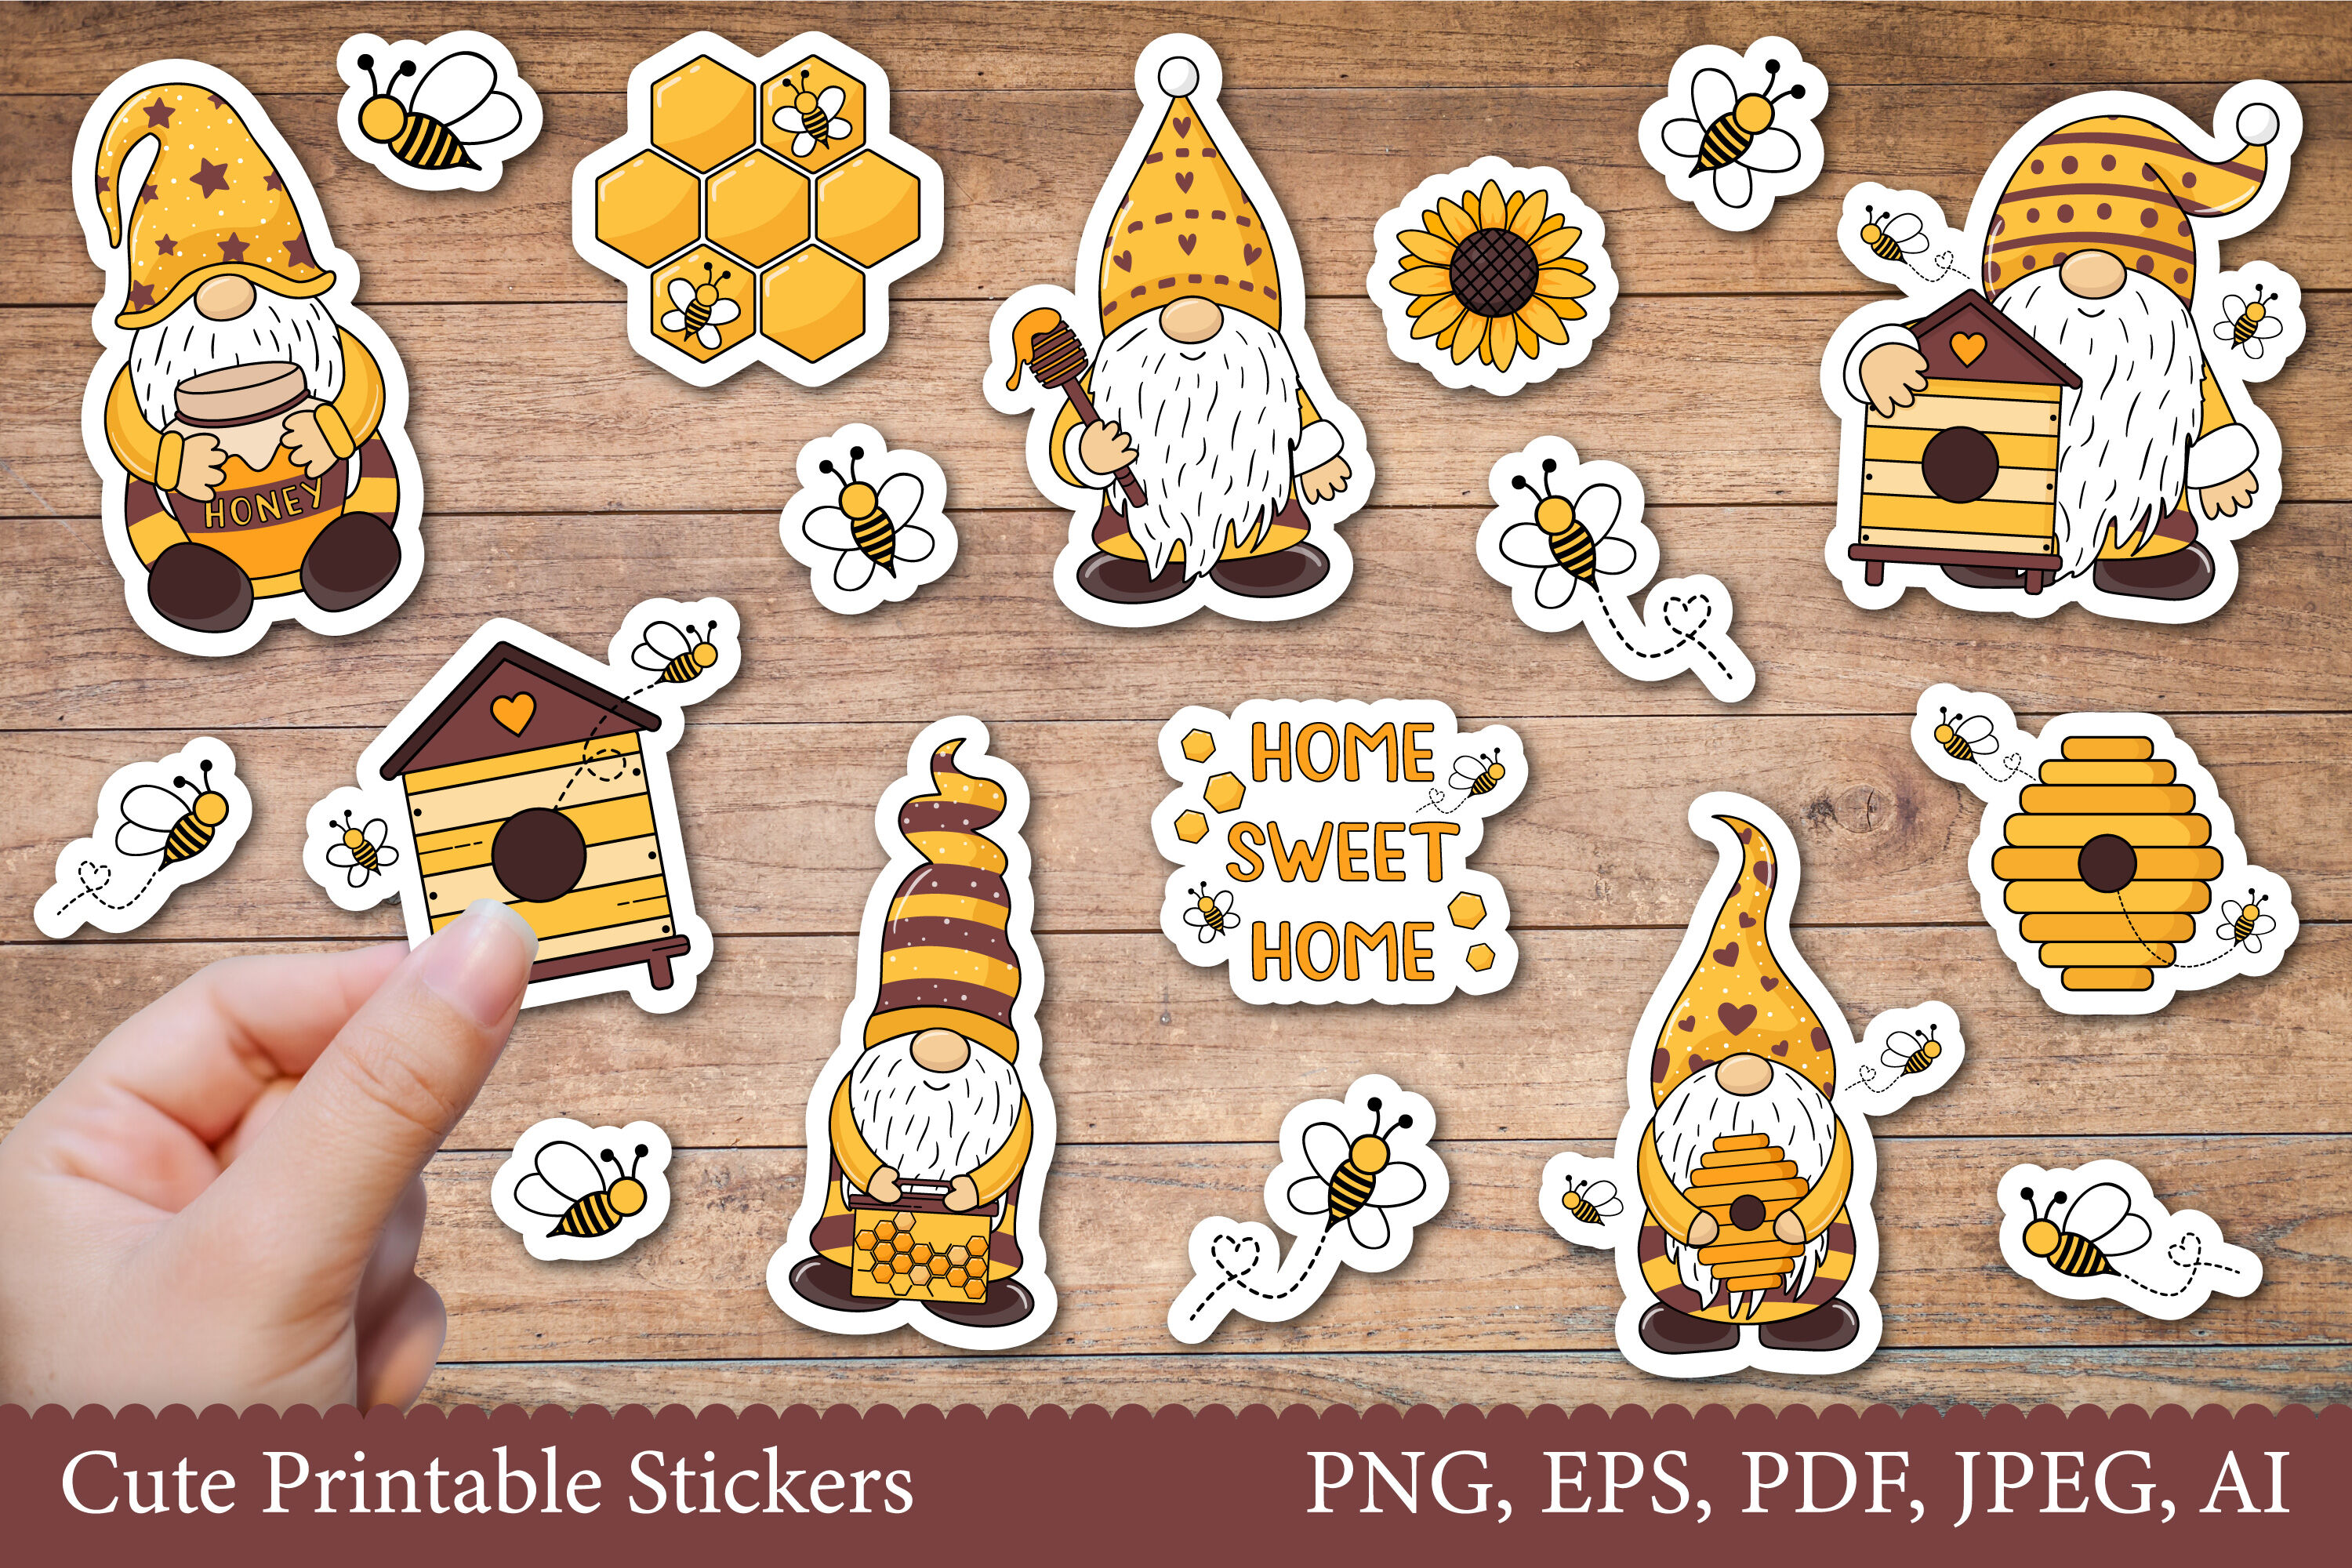 Gnomes and Bee Stickers, Print and Cut Stickers By MaryMykh | TheHungryJPEG